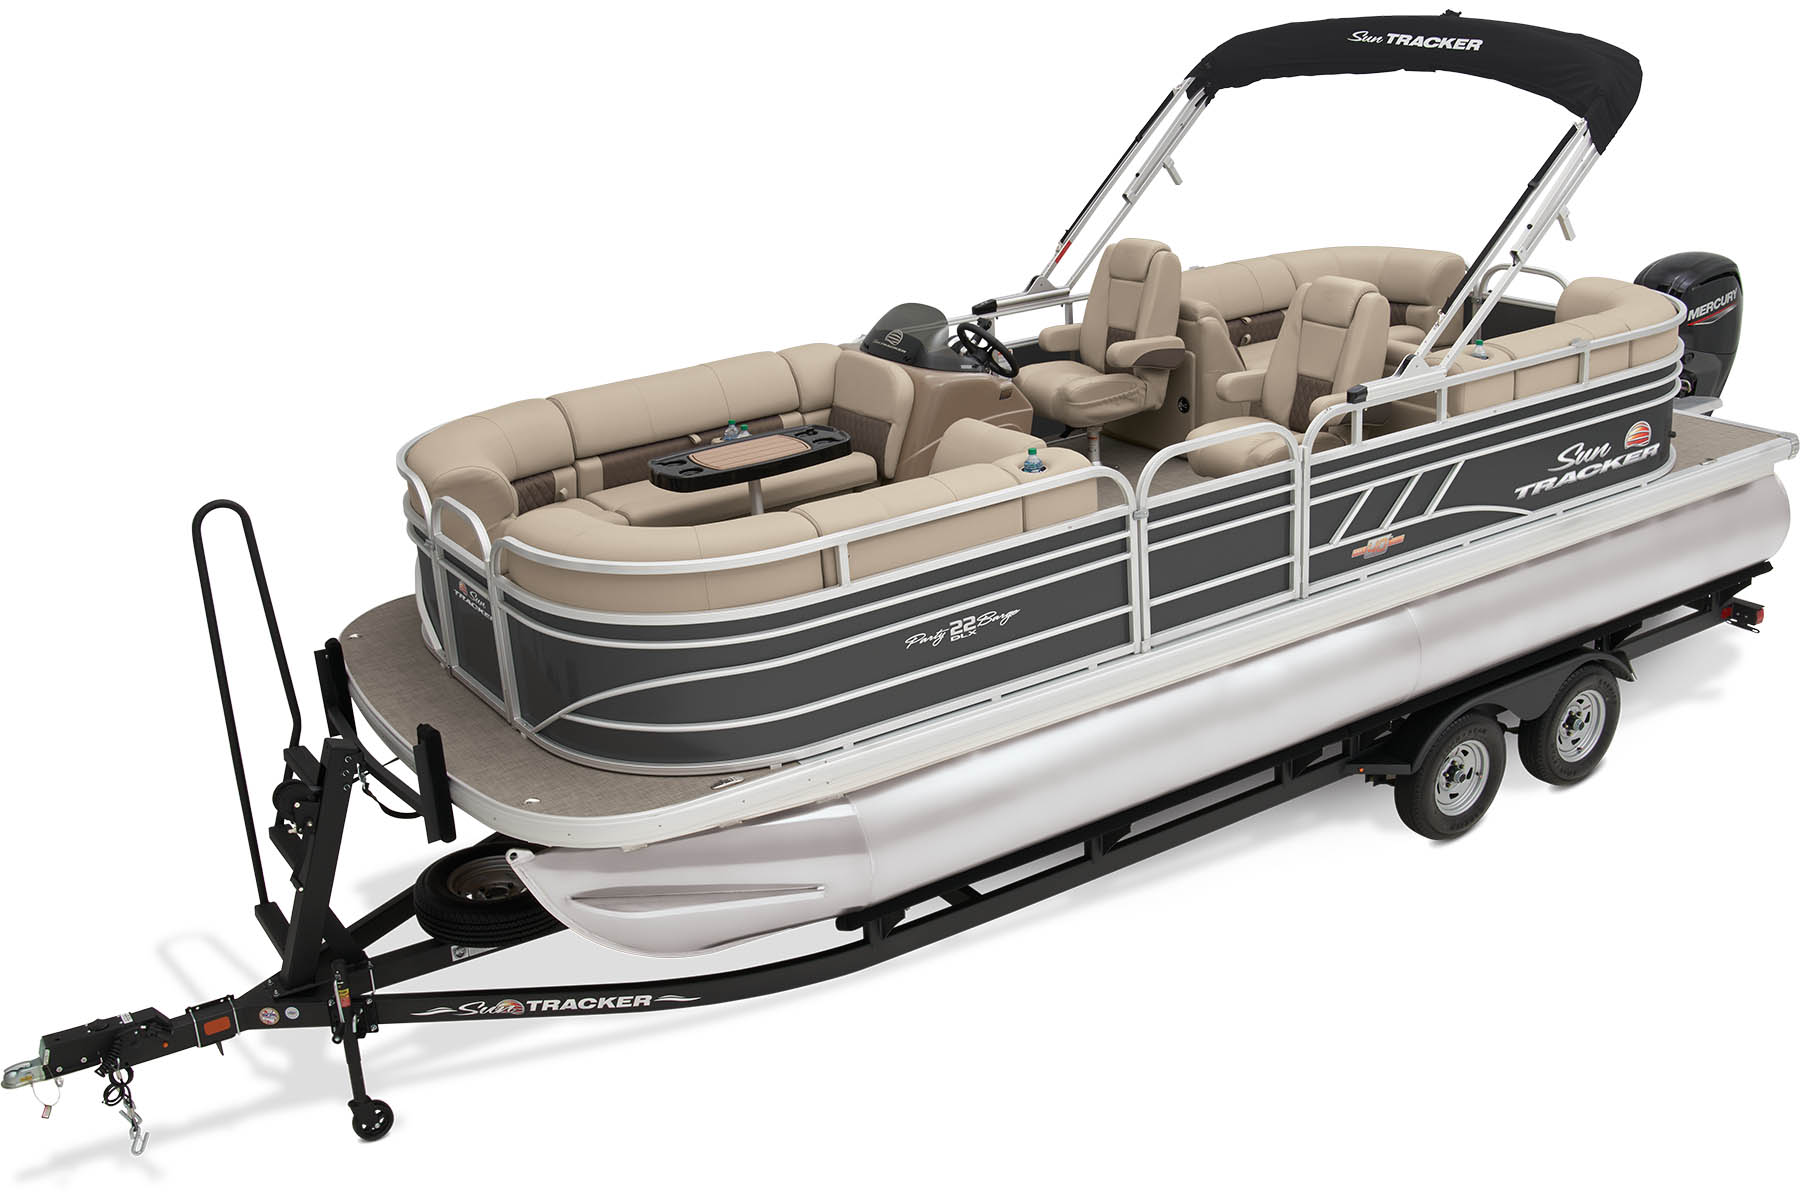 PARTY BARGE 22 DLX SUN TRACKER Recreational Pontoon Boat